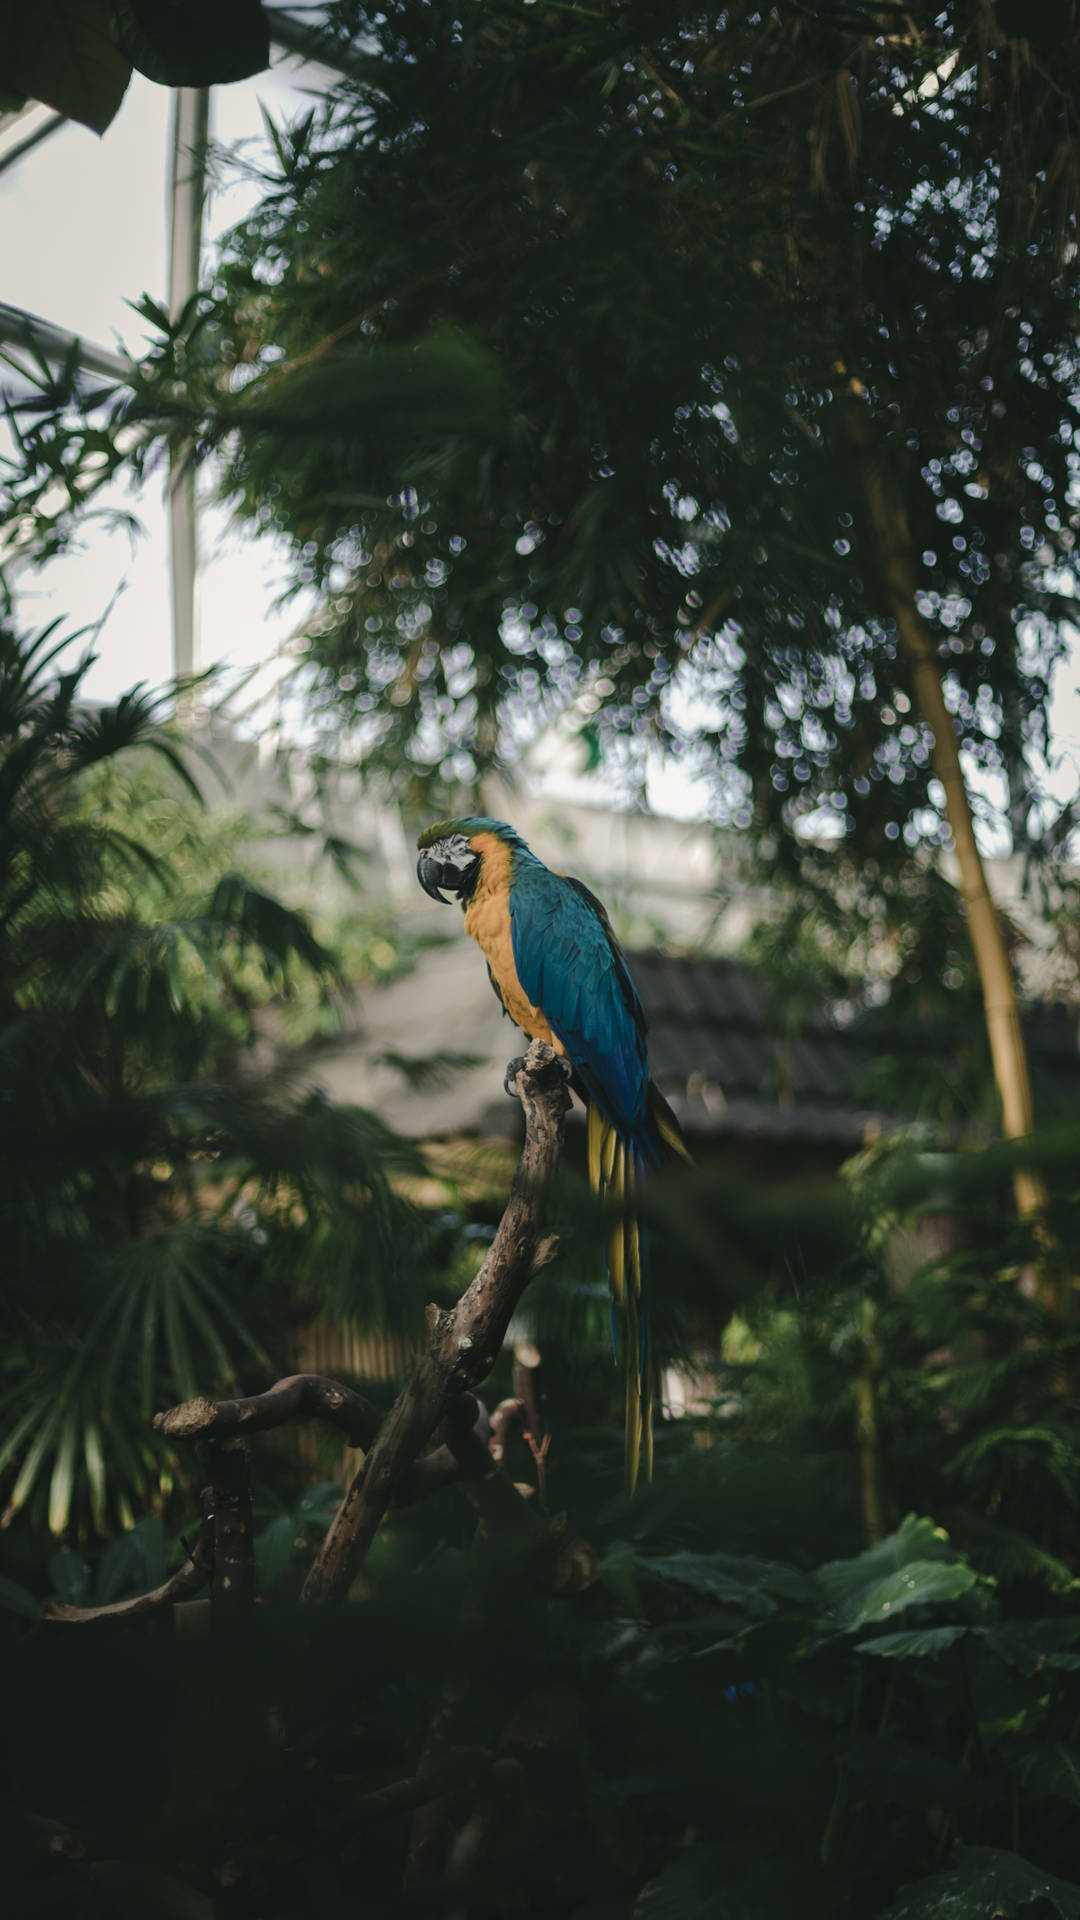 “The majestic beauty of a Blue and Gold Macaw soaring through the Jungle” Wallpaper